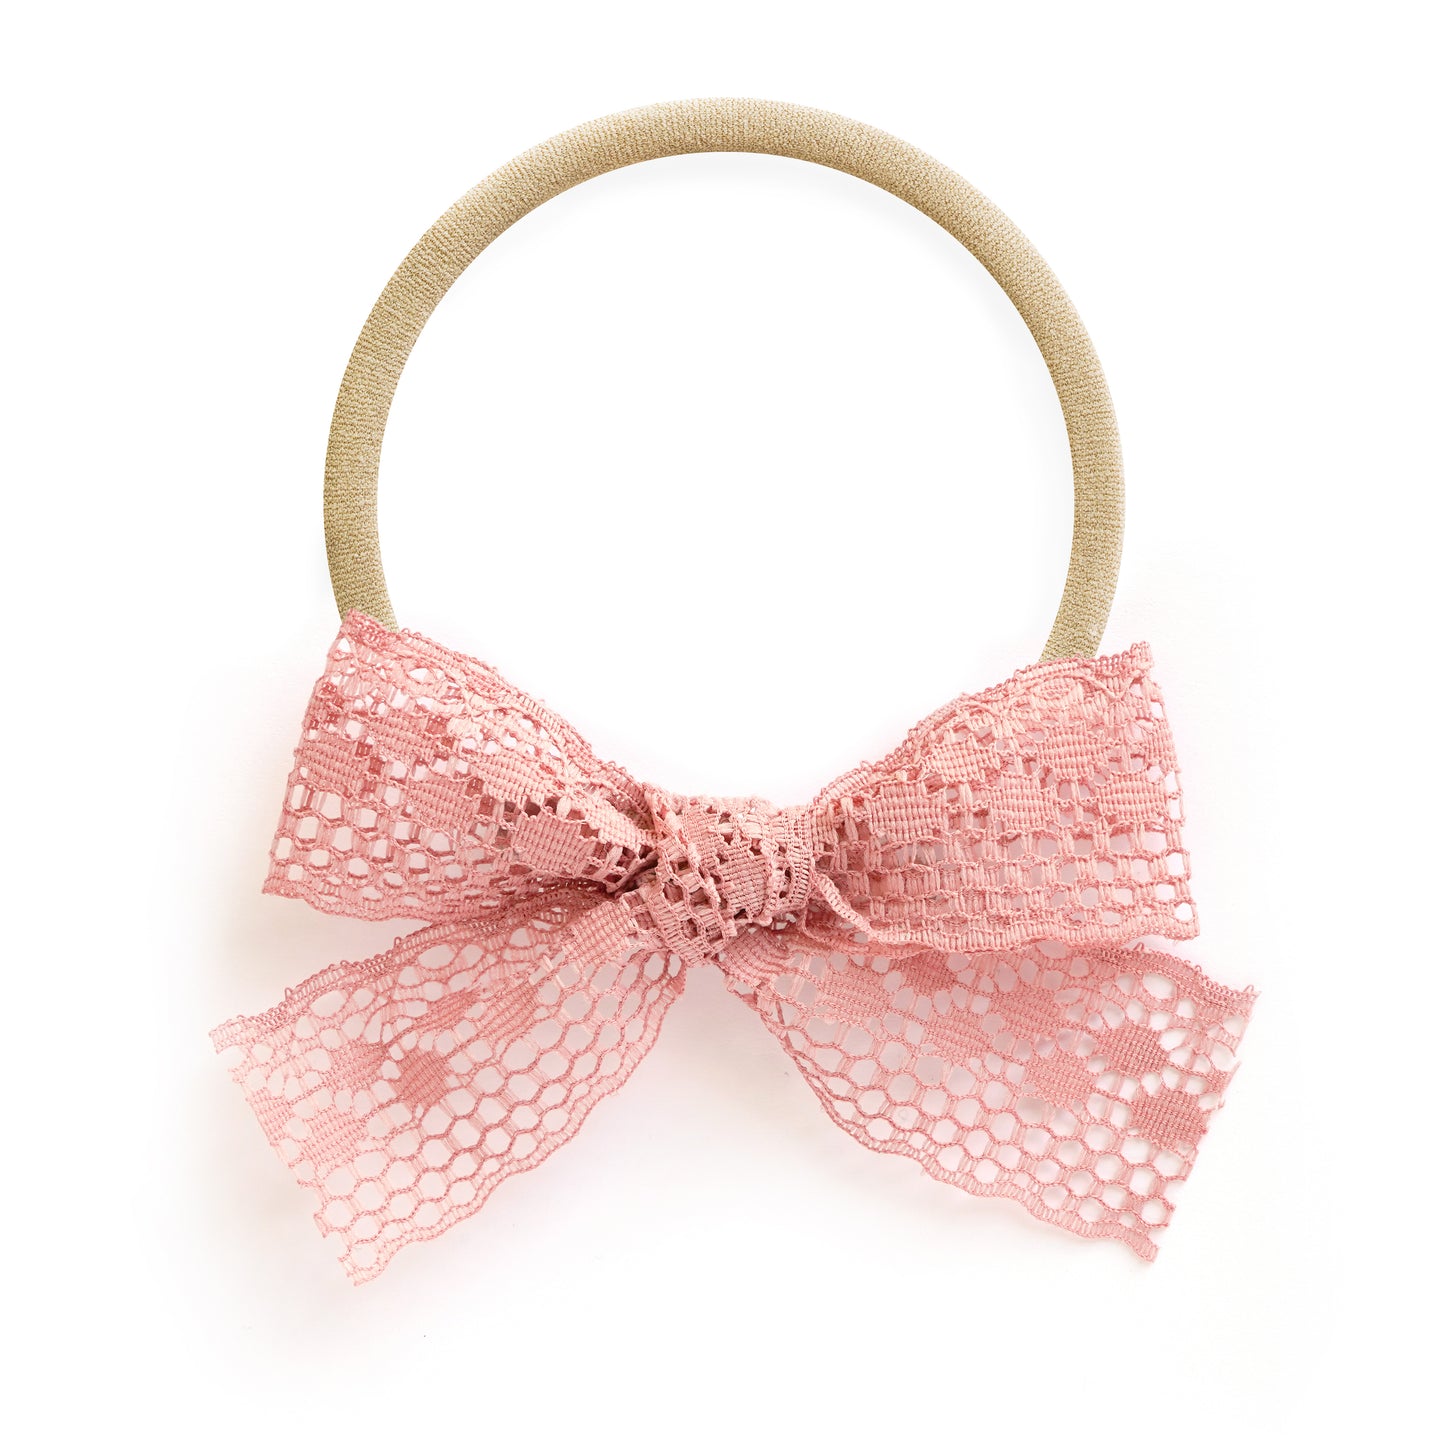 stretchy one size fits all baby headband with dusty soft blush pink lace bow